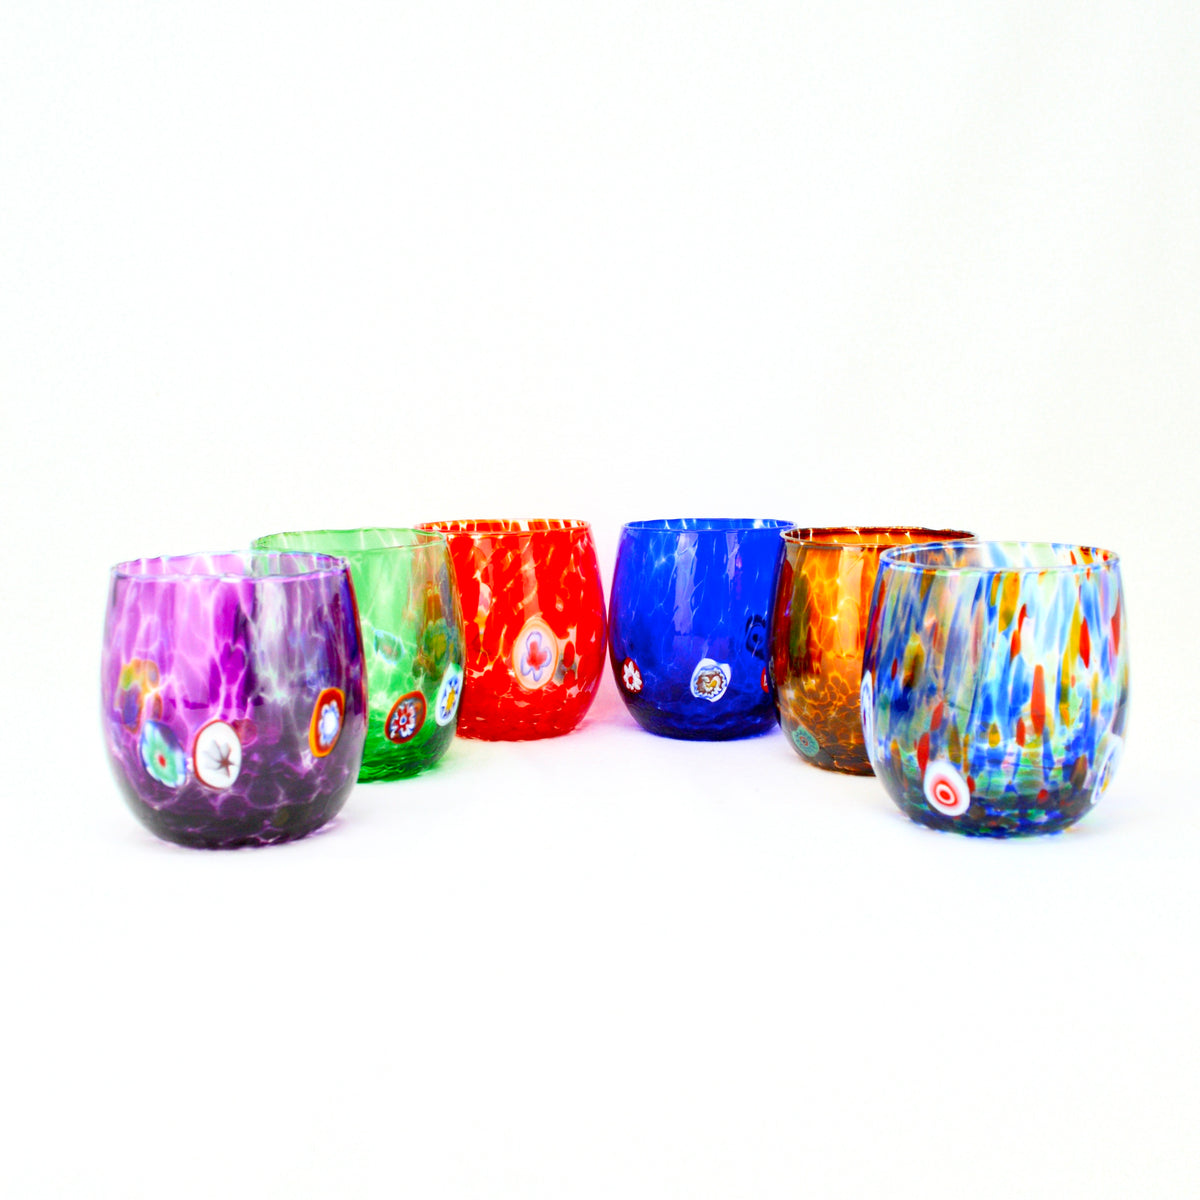 Contemporary Stemless Wine Glasses, Multi-colored, Set of 6, Made in Italy - My Italian Decor